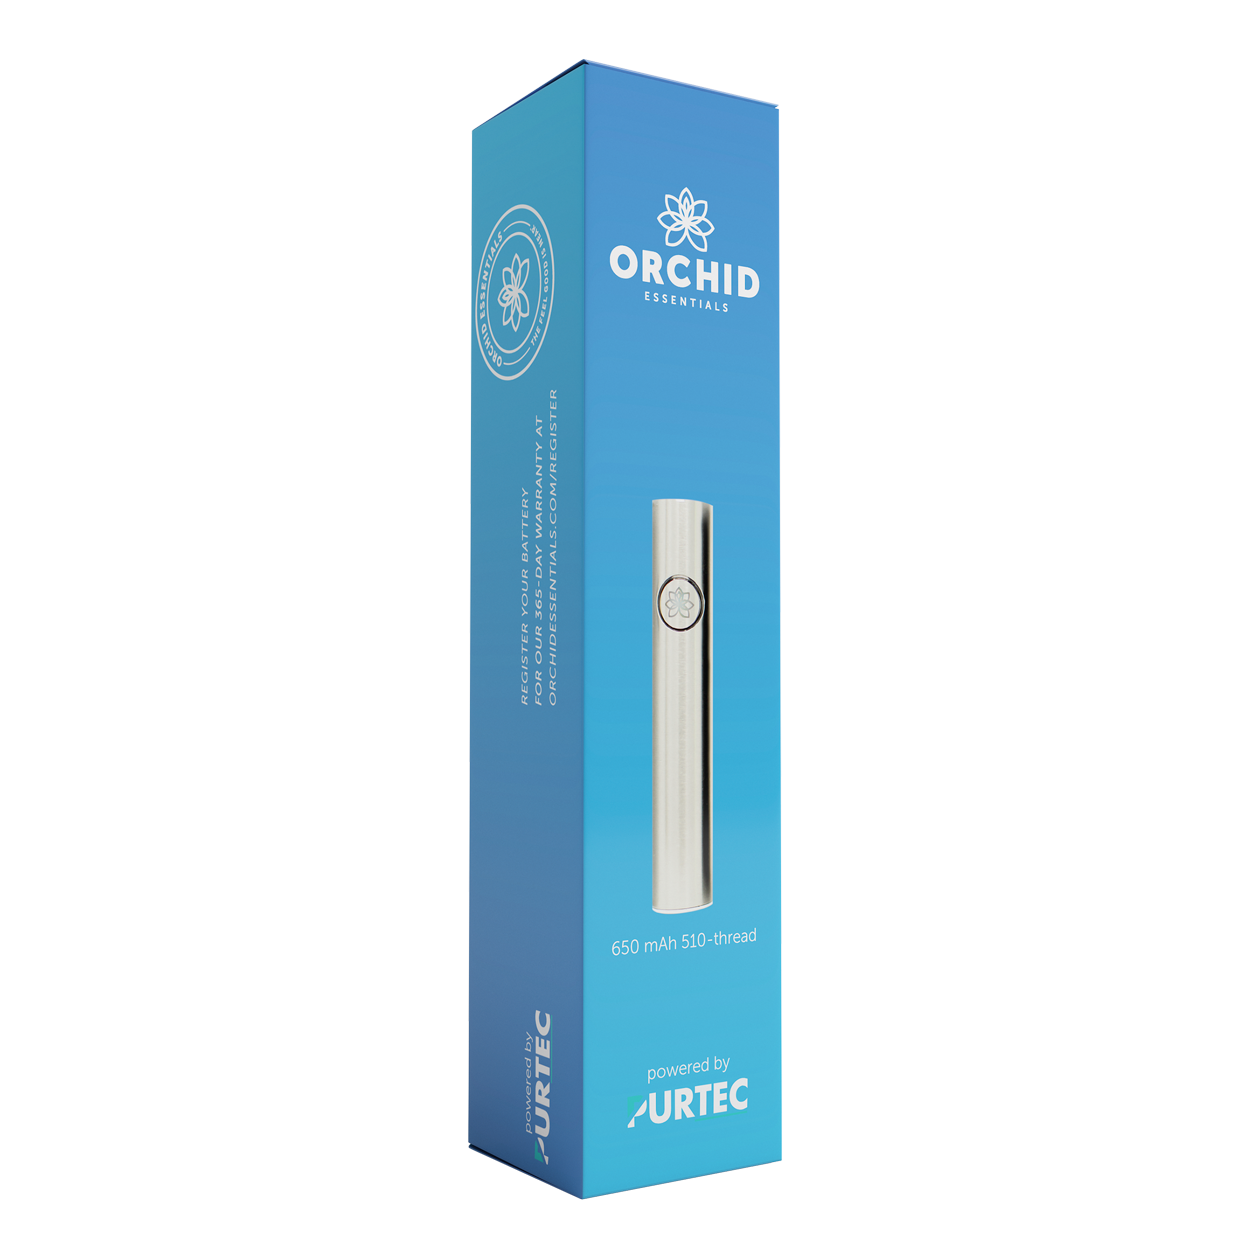 The Beast – Orchid’s 650mAh Battery